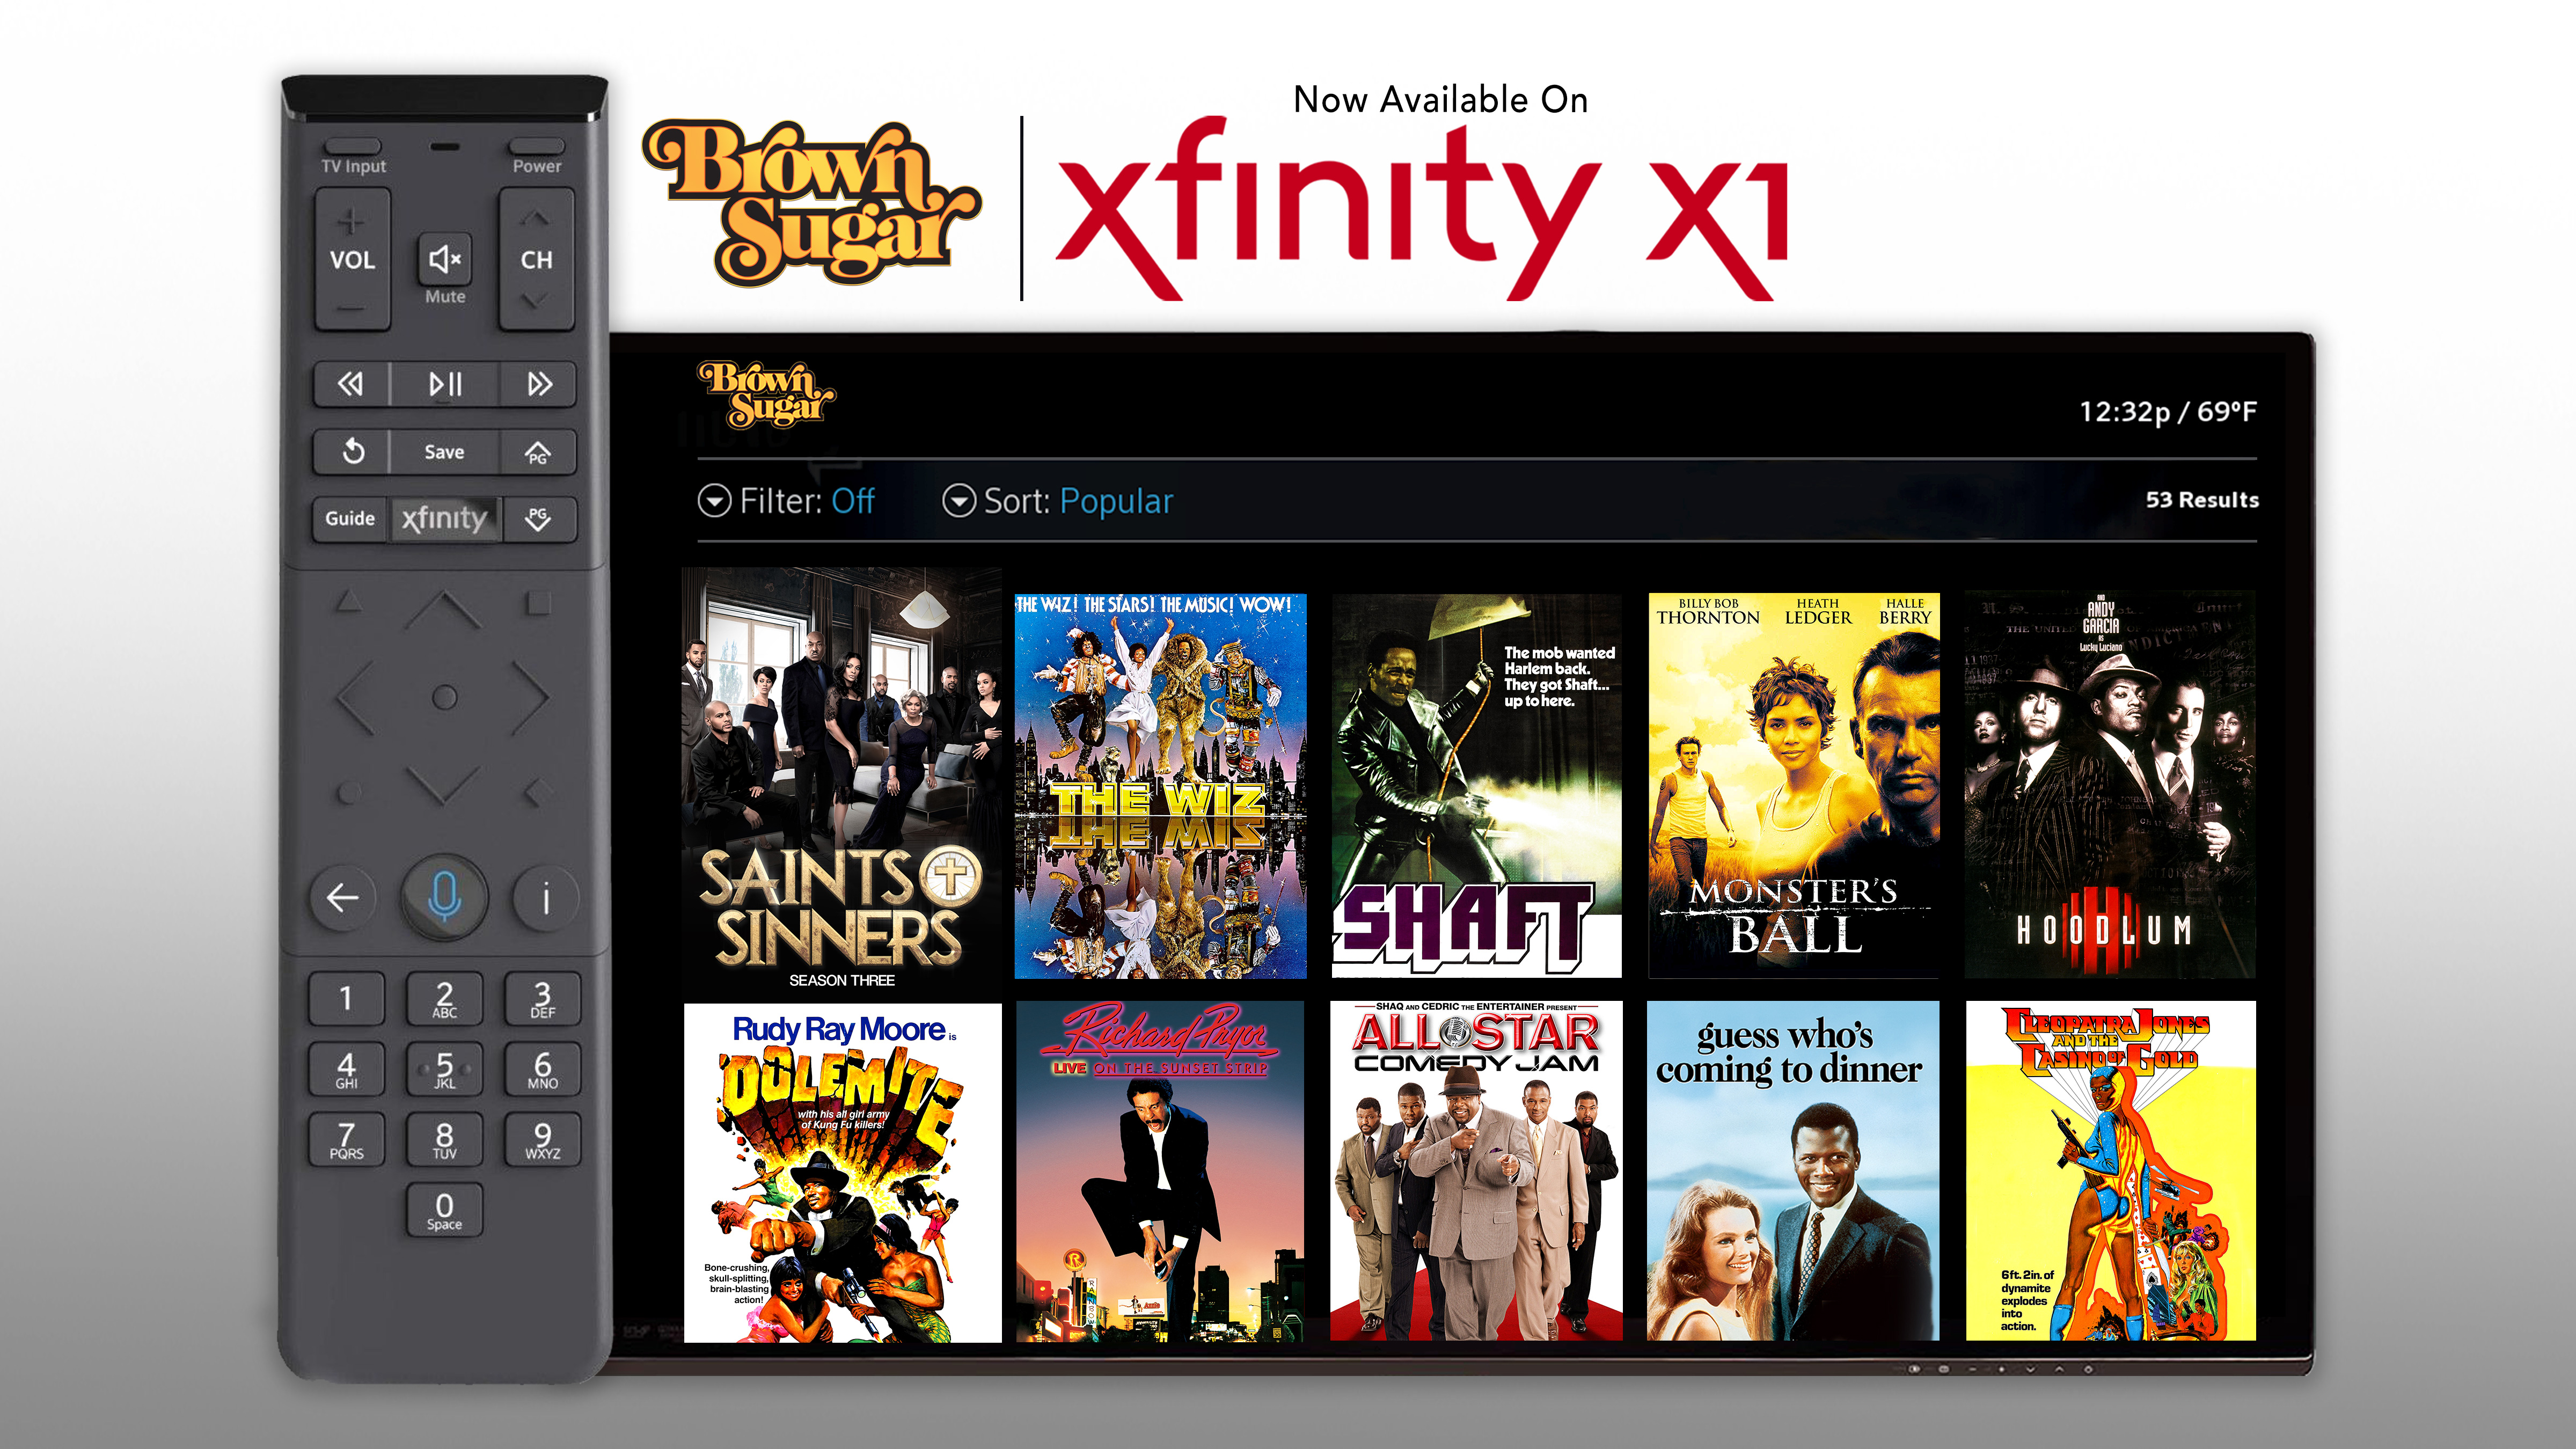 Hallmark Streaming Service Launches on Xfinity and Contour Next TV